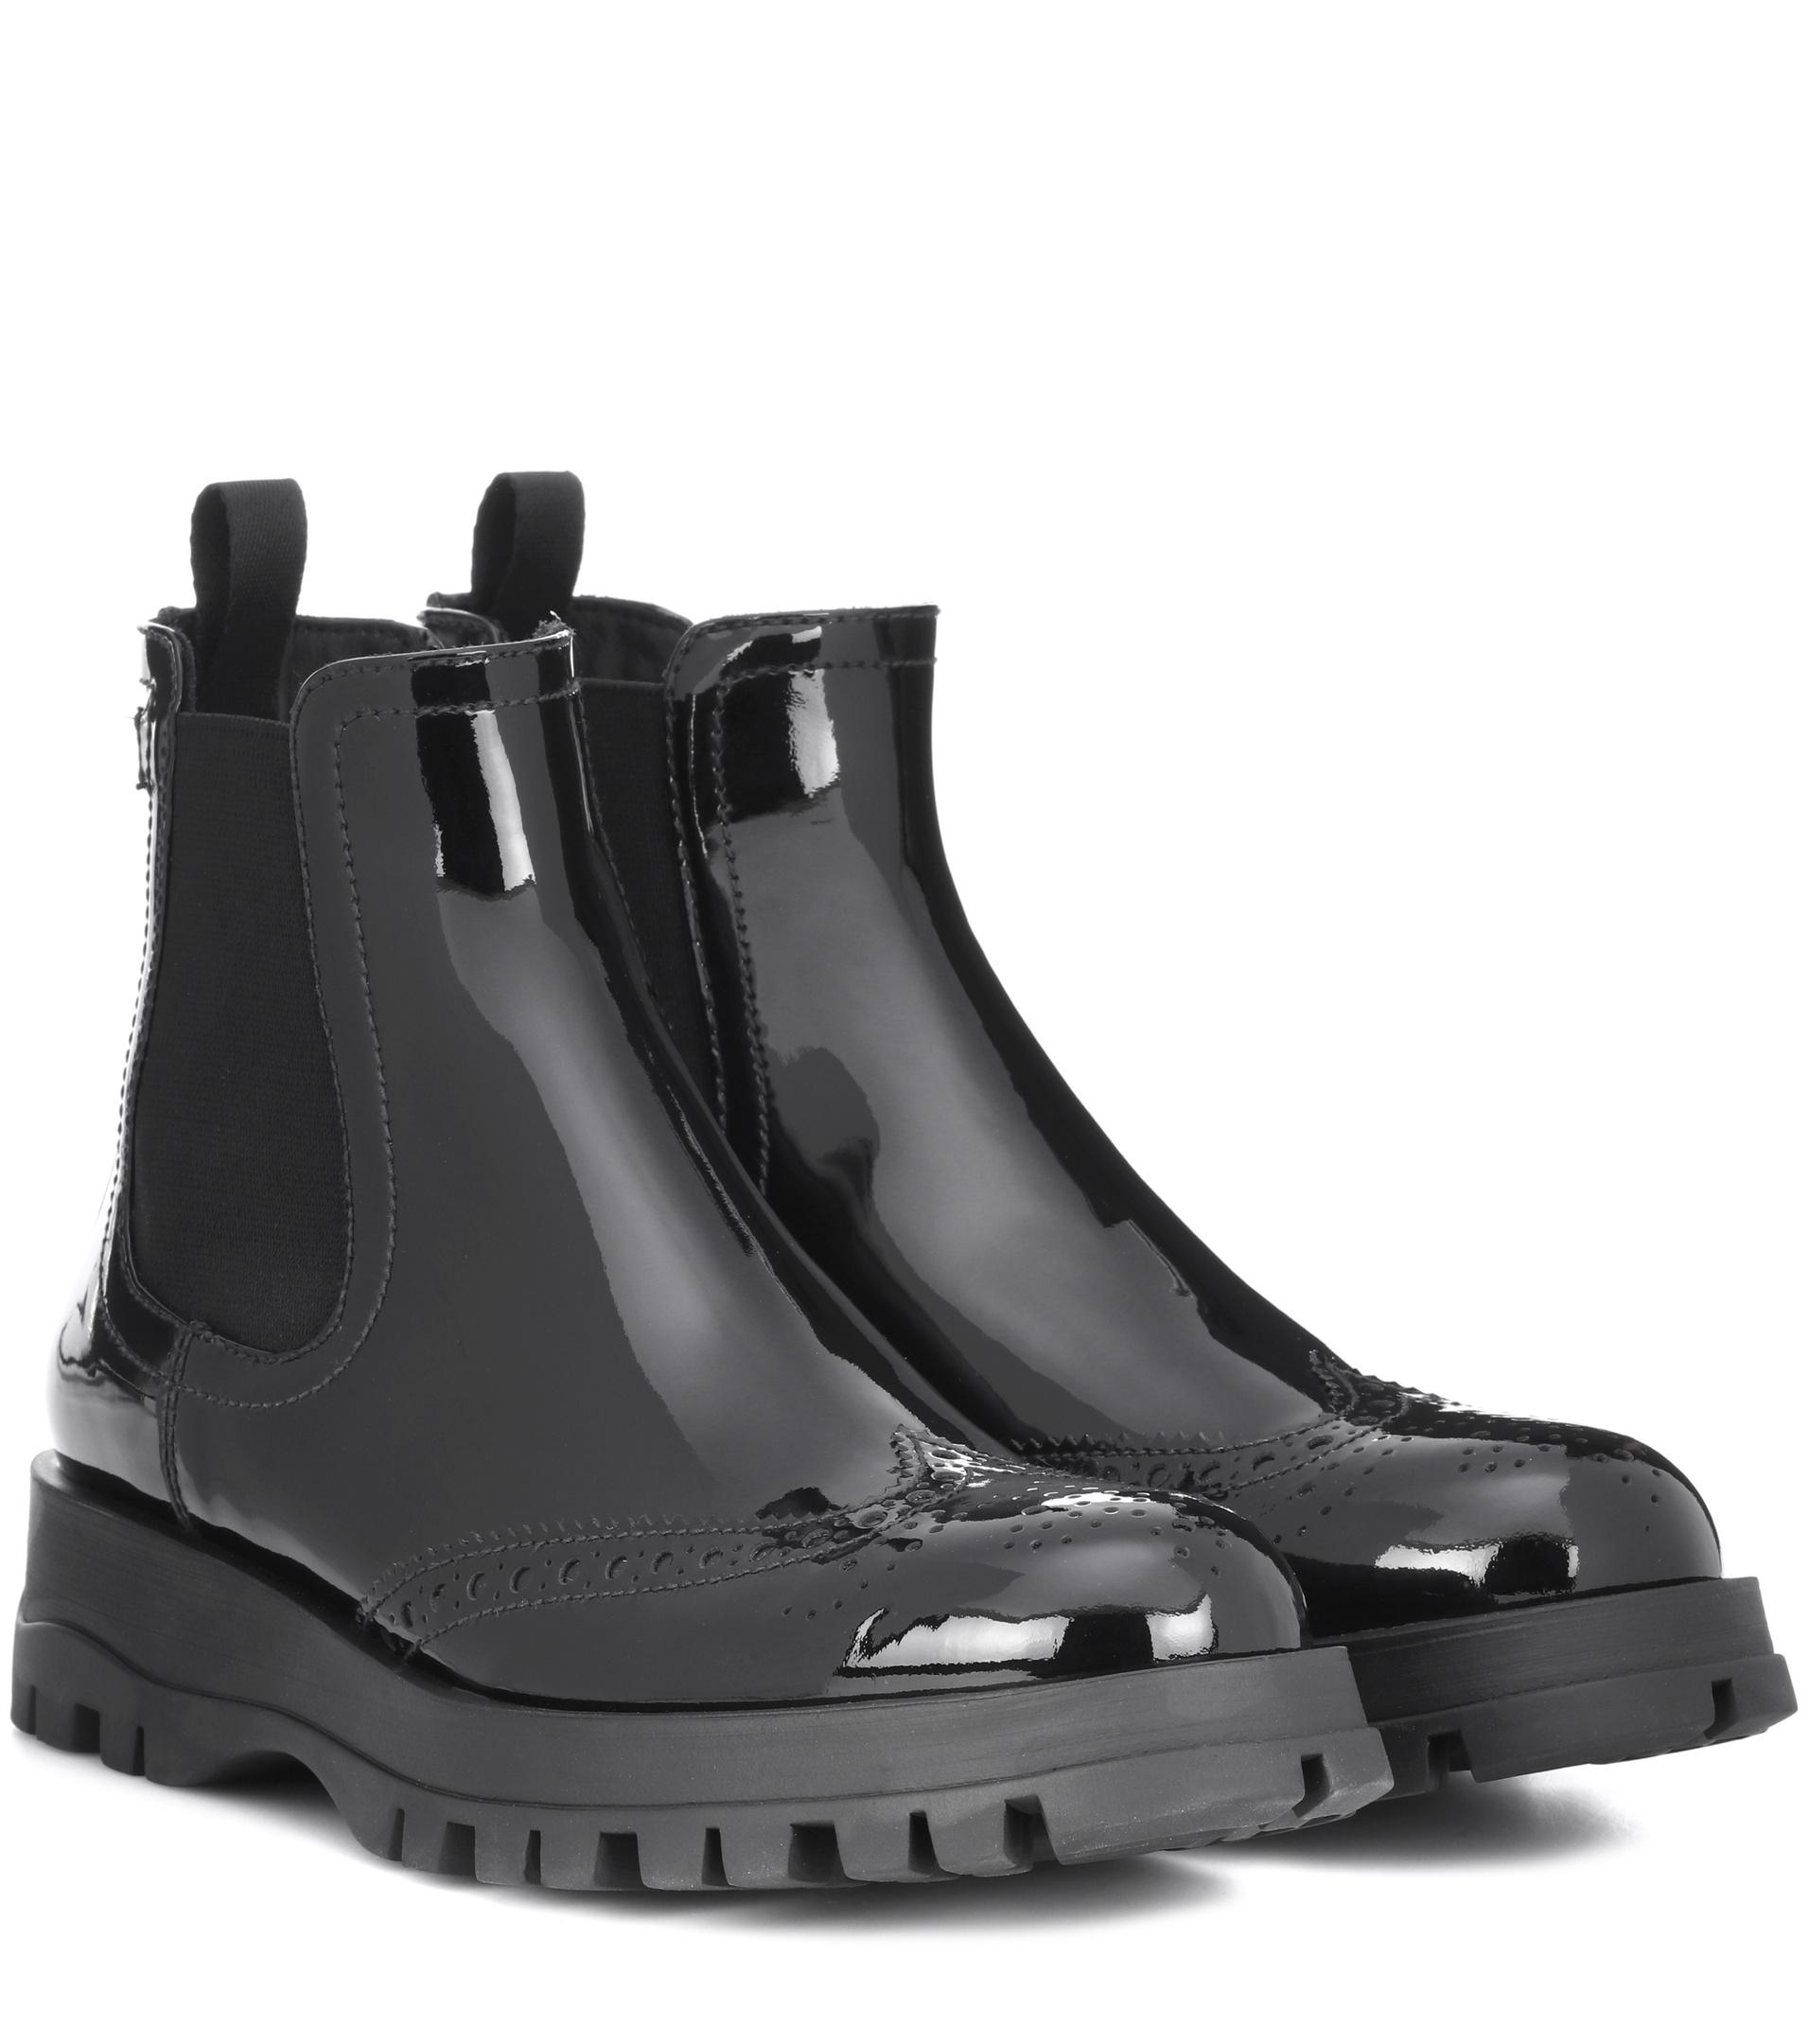 prada patent leather ankle boots